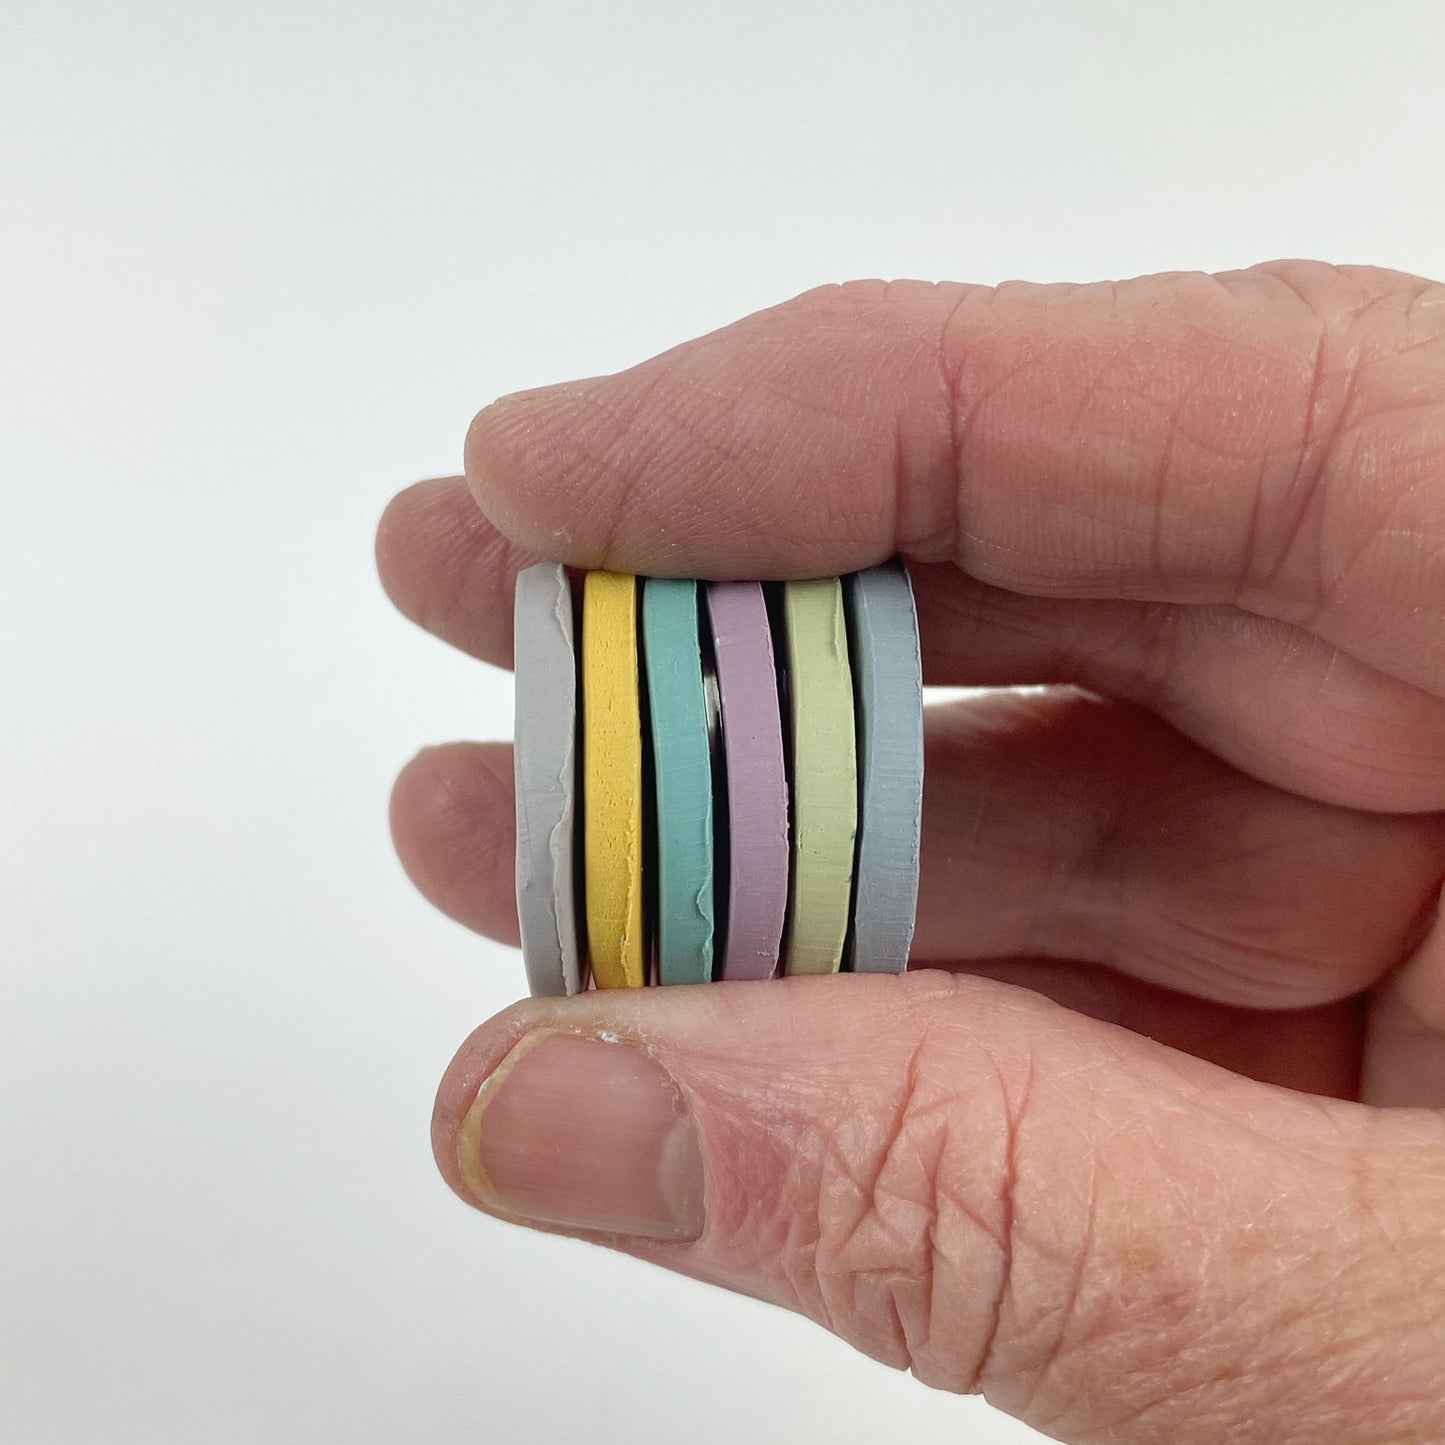 Polymer Clay Secret Admirer Heirloom Harmony. Stacked sample discs of each clay color, held in a hand for a side view